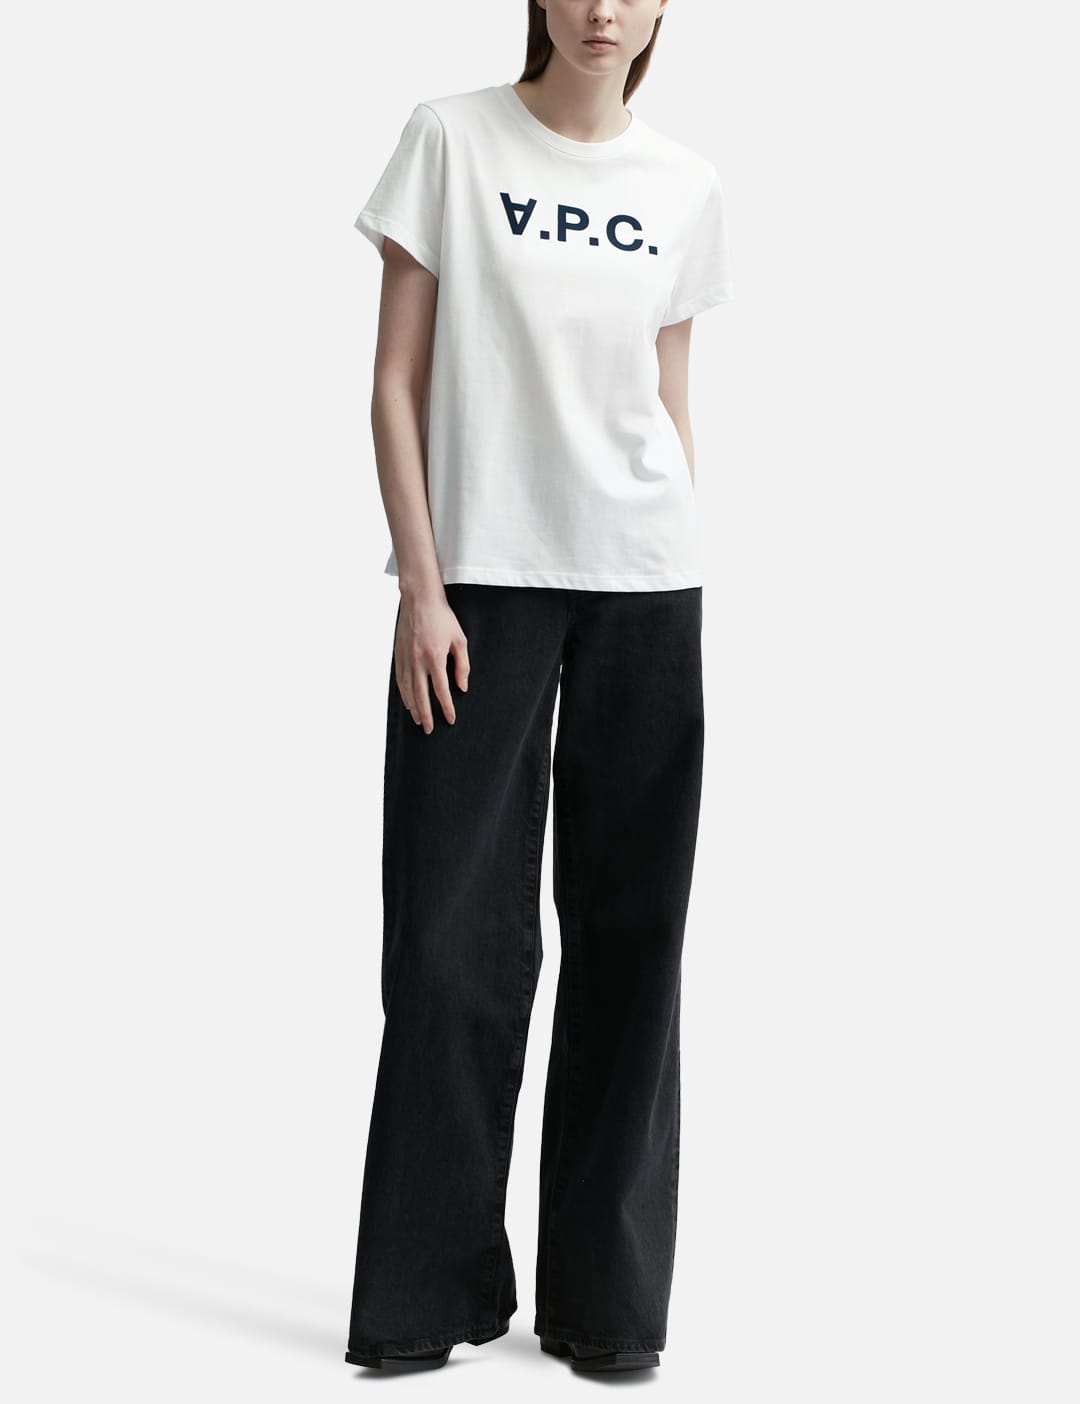 A.P.C. - VPC Blanc F T-shirt | HBX - Globally Curated Fashion and